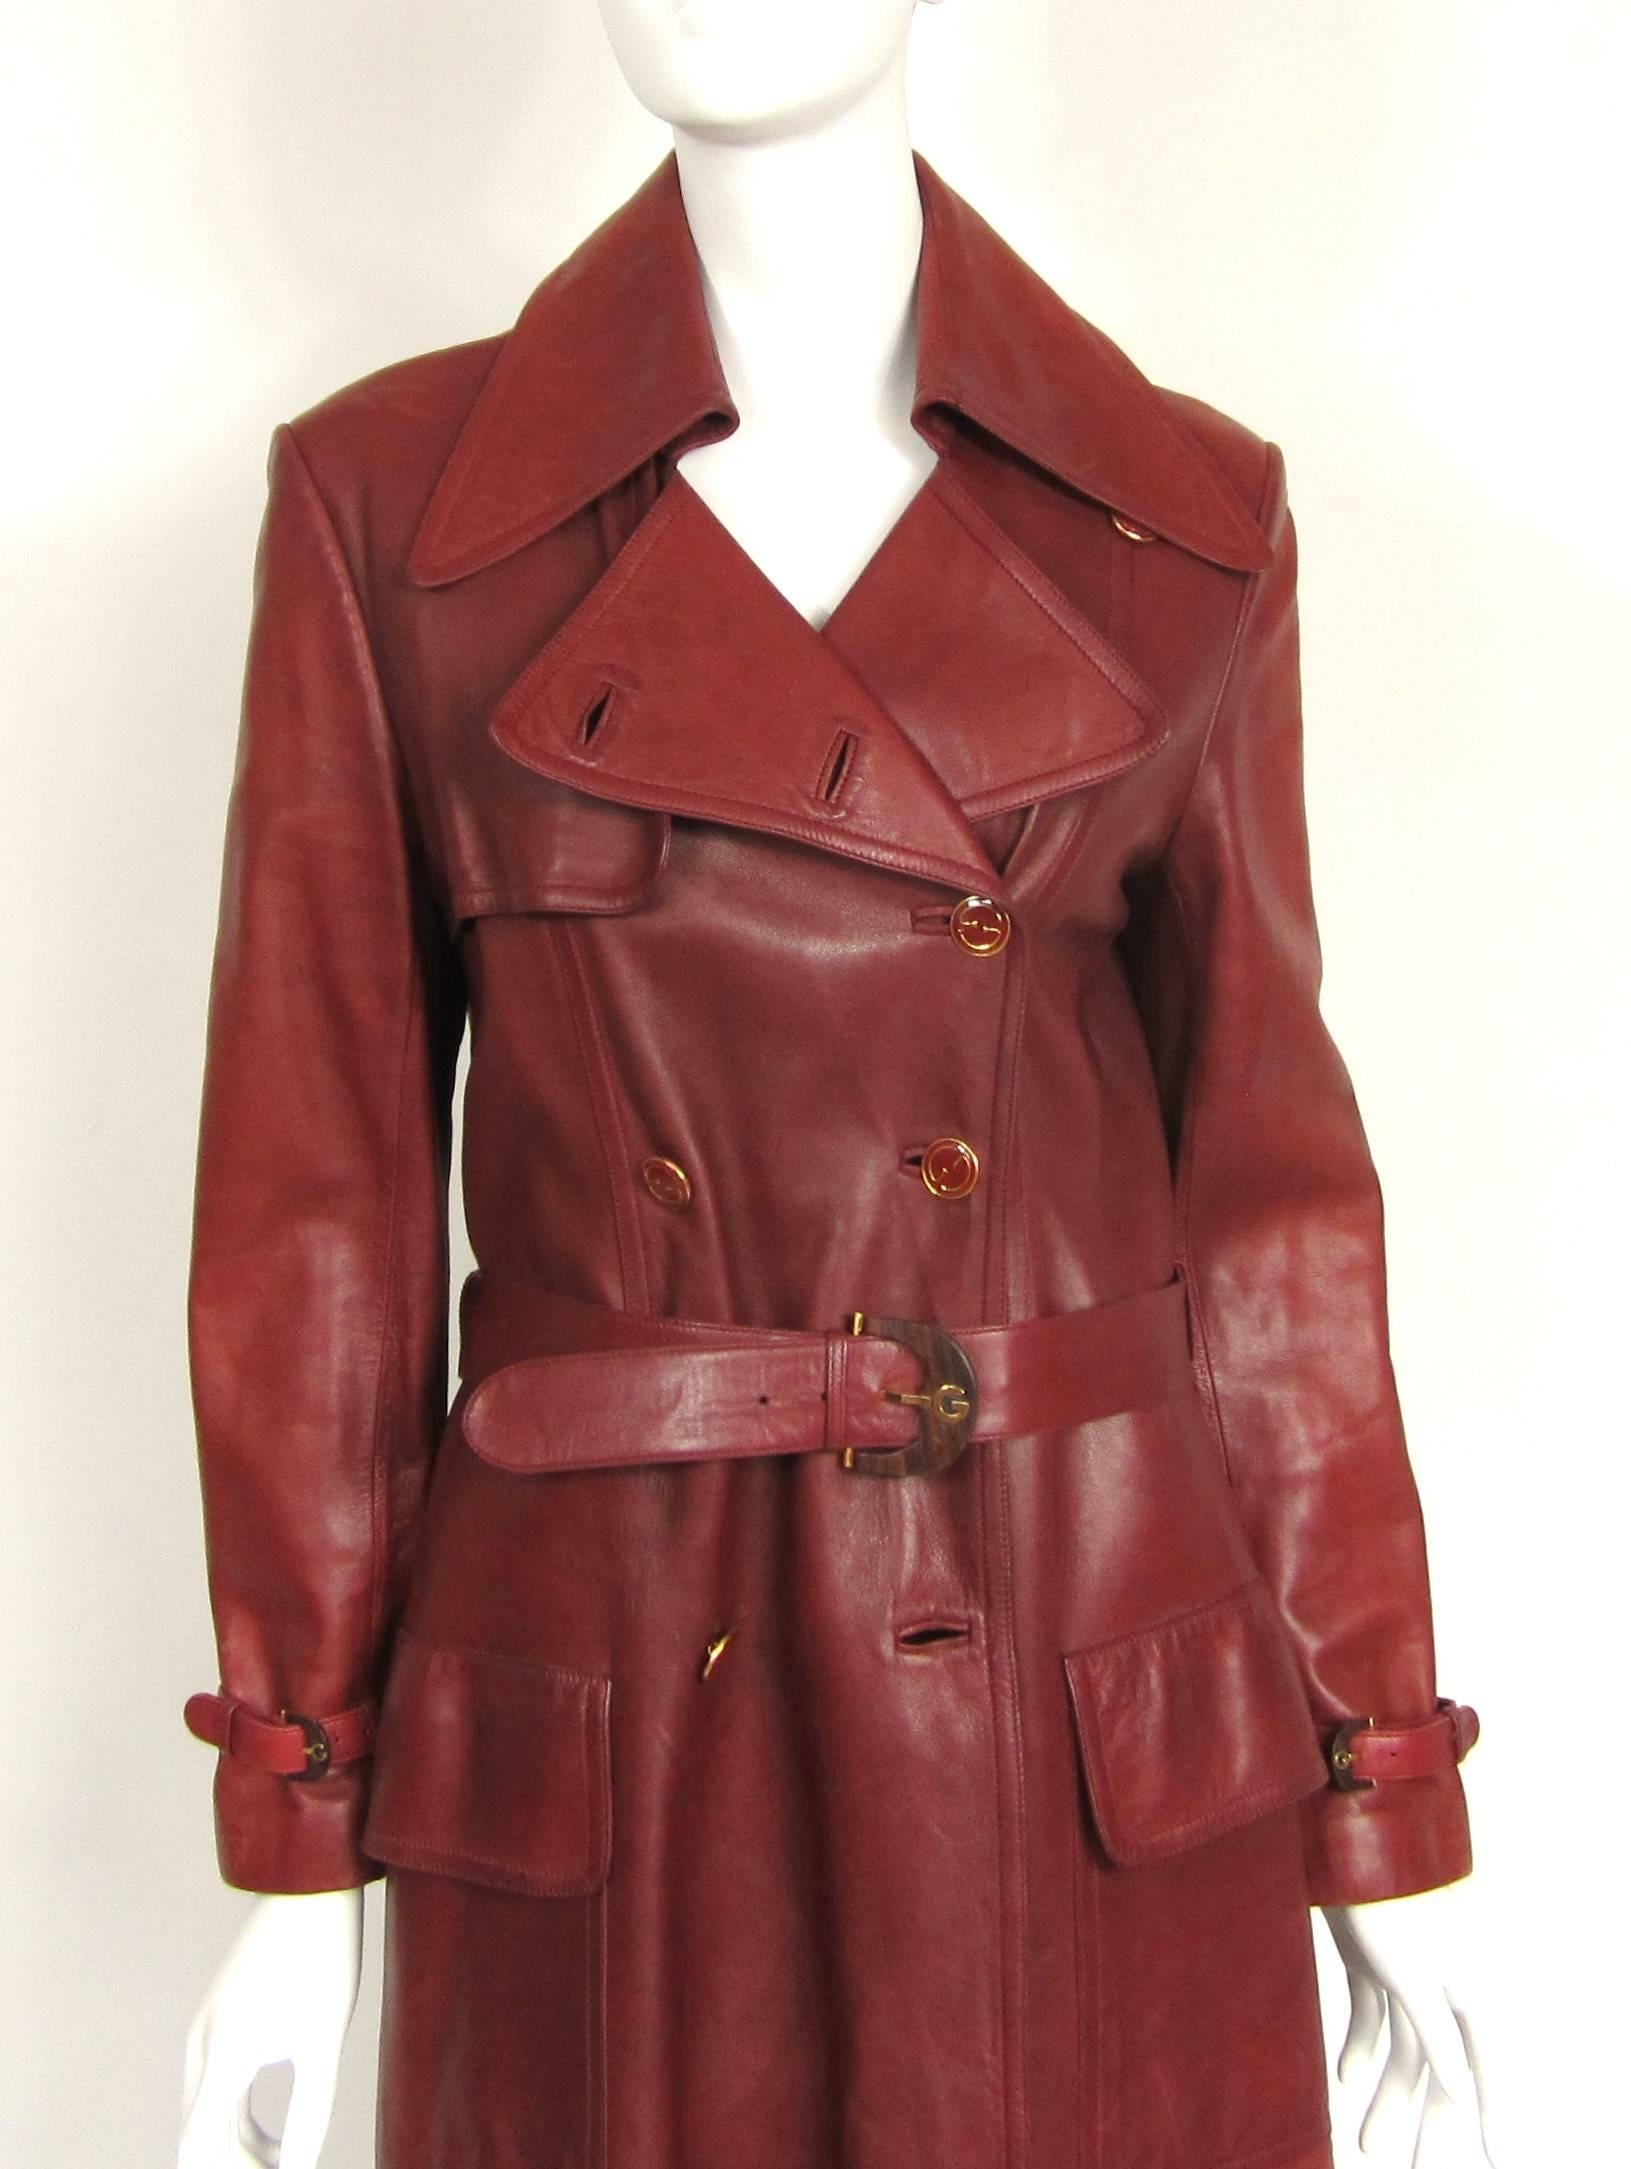 Timeless Burgundy Gucci Leather Trench Coat, featuring Gucci Logo Buttons and a stunning Gucci Lining. Butter Soft Leather. Kick Pleat in the back. Double Breasted with a great pointed collar. Patch front pockets. Labeled a size 48. Will fit a 4-6.